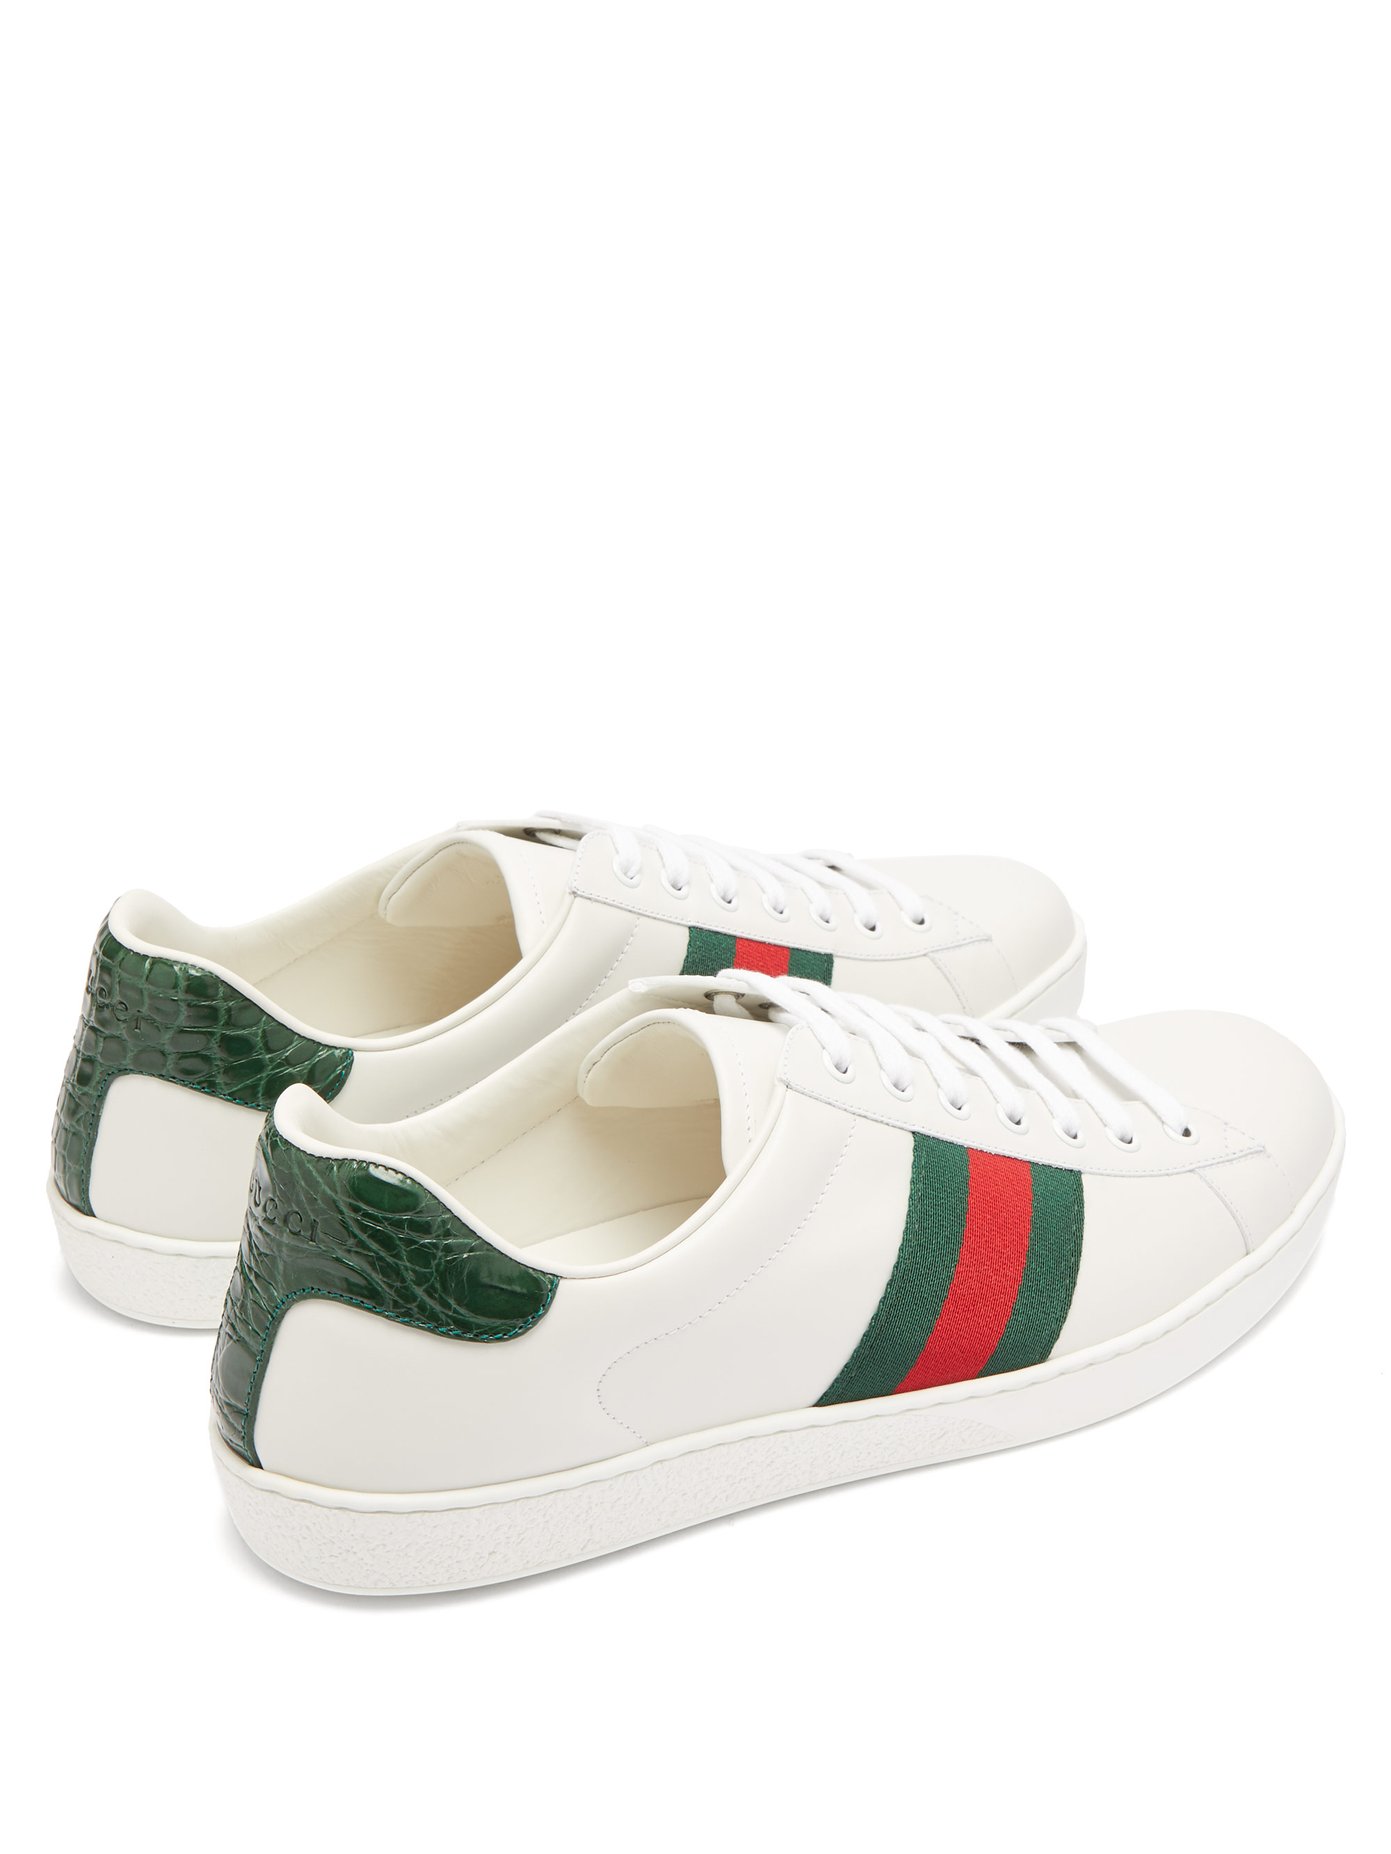 Gucci 'ace' Croc Embossed Counter Leather Sneakers In 9071 Bianco ...